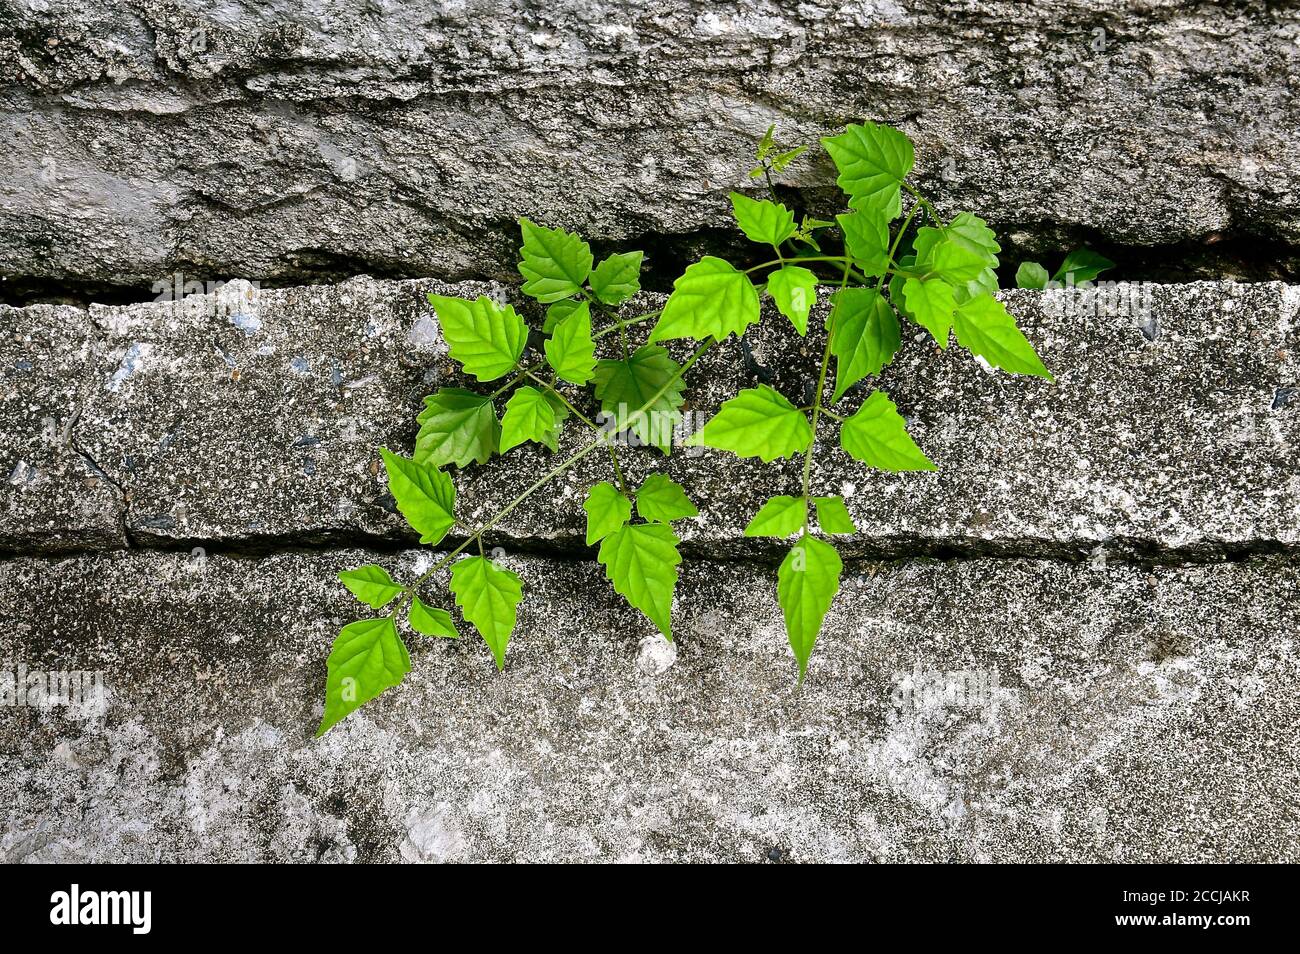 A young plant shoot growing out of a crevice in between some concrete slabs. Stock Photo